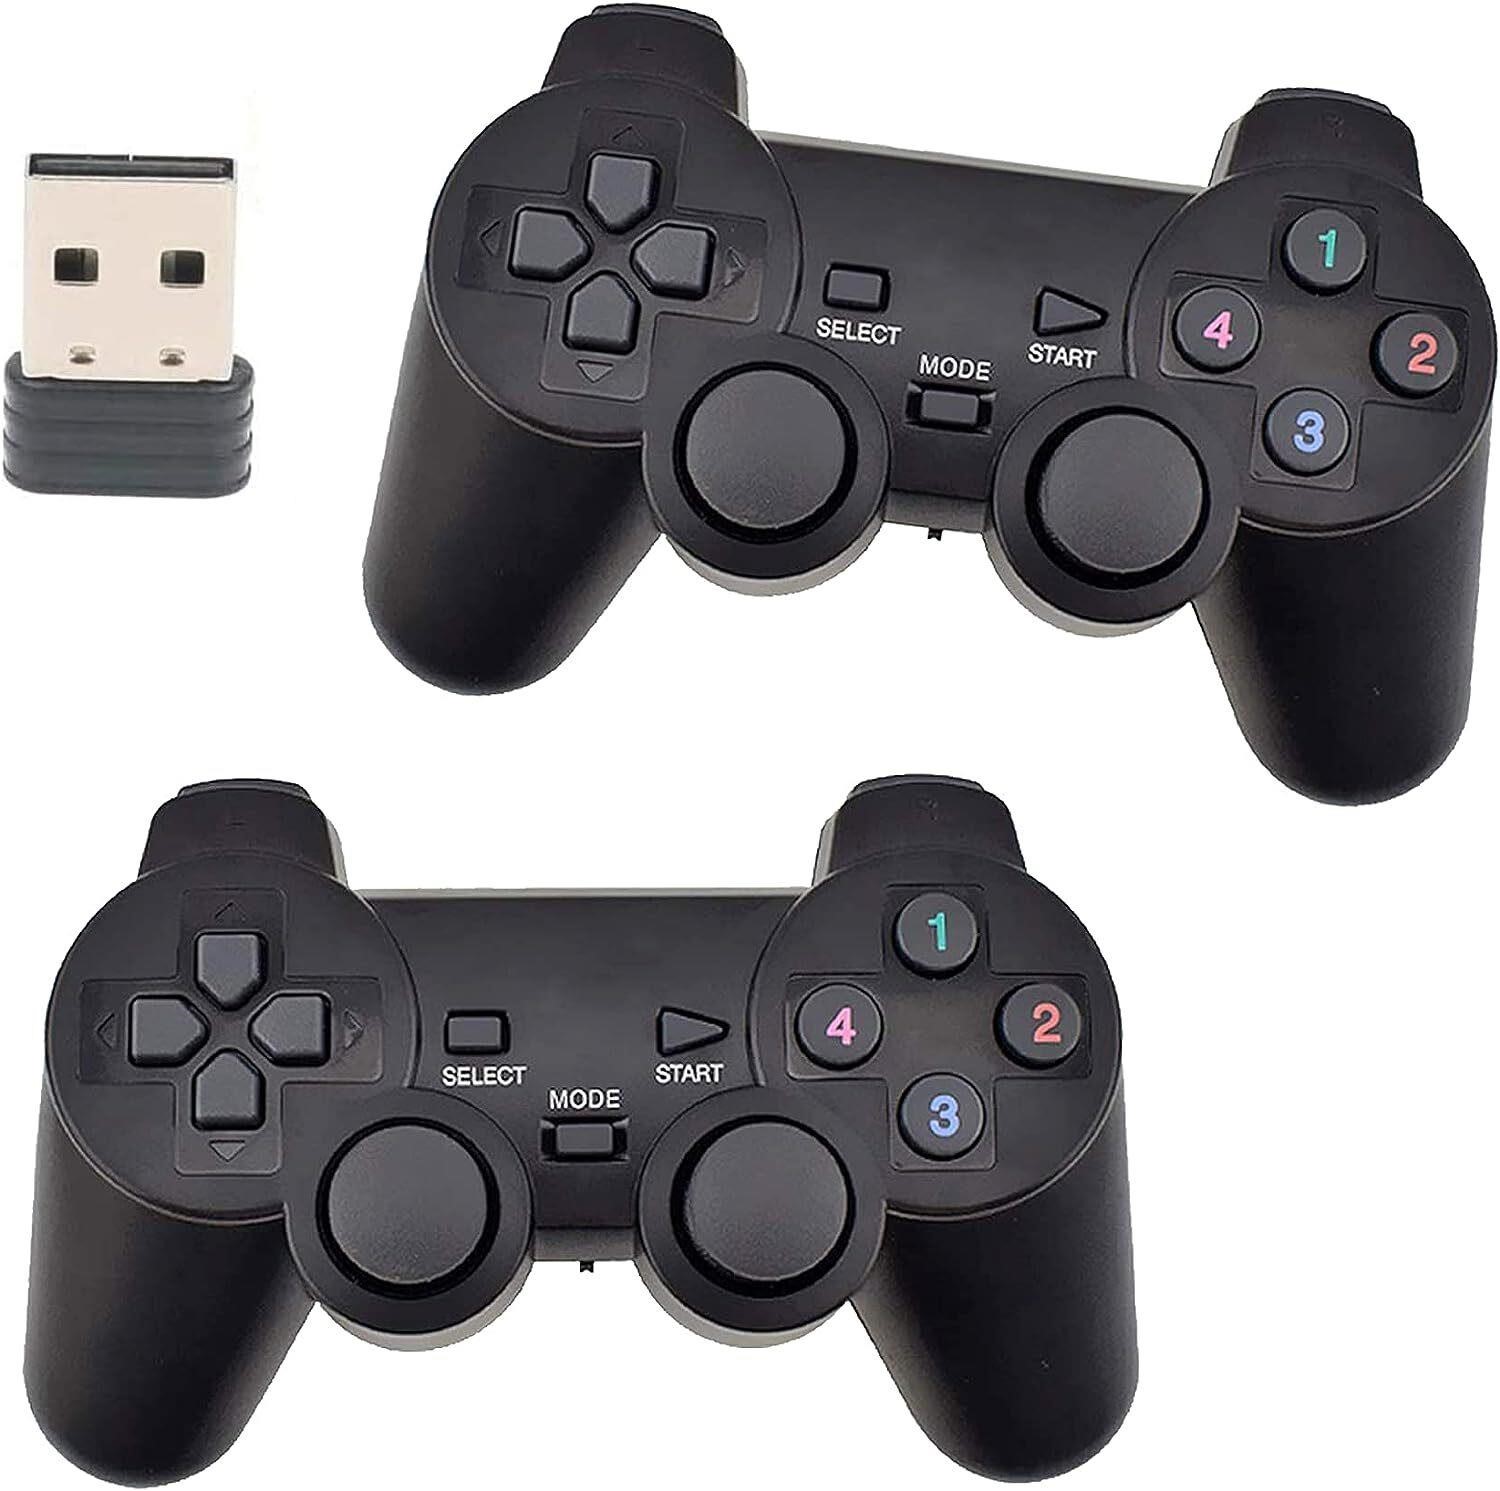 2.4GHz USB Twins Wireless game Controller Gamepad